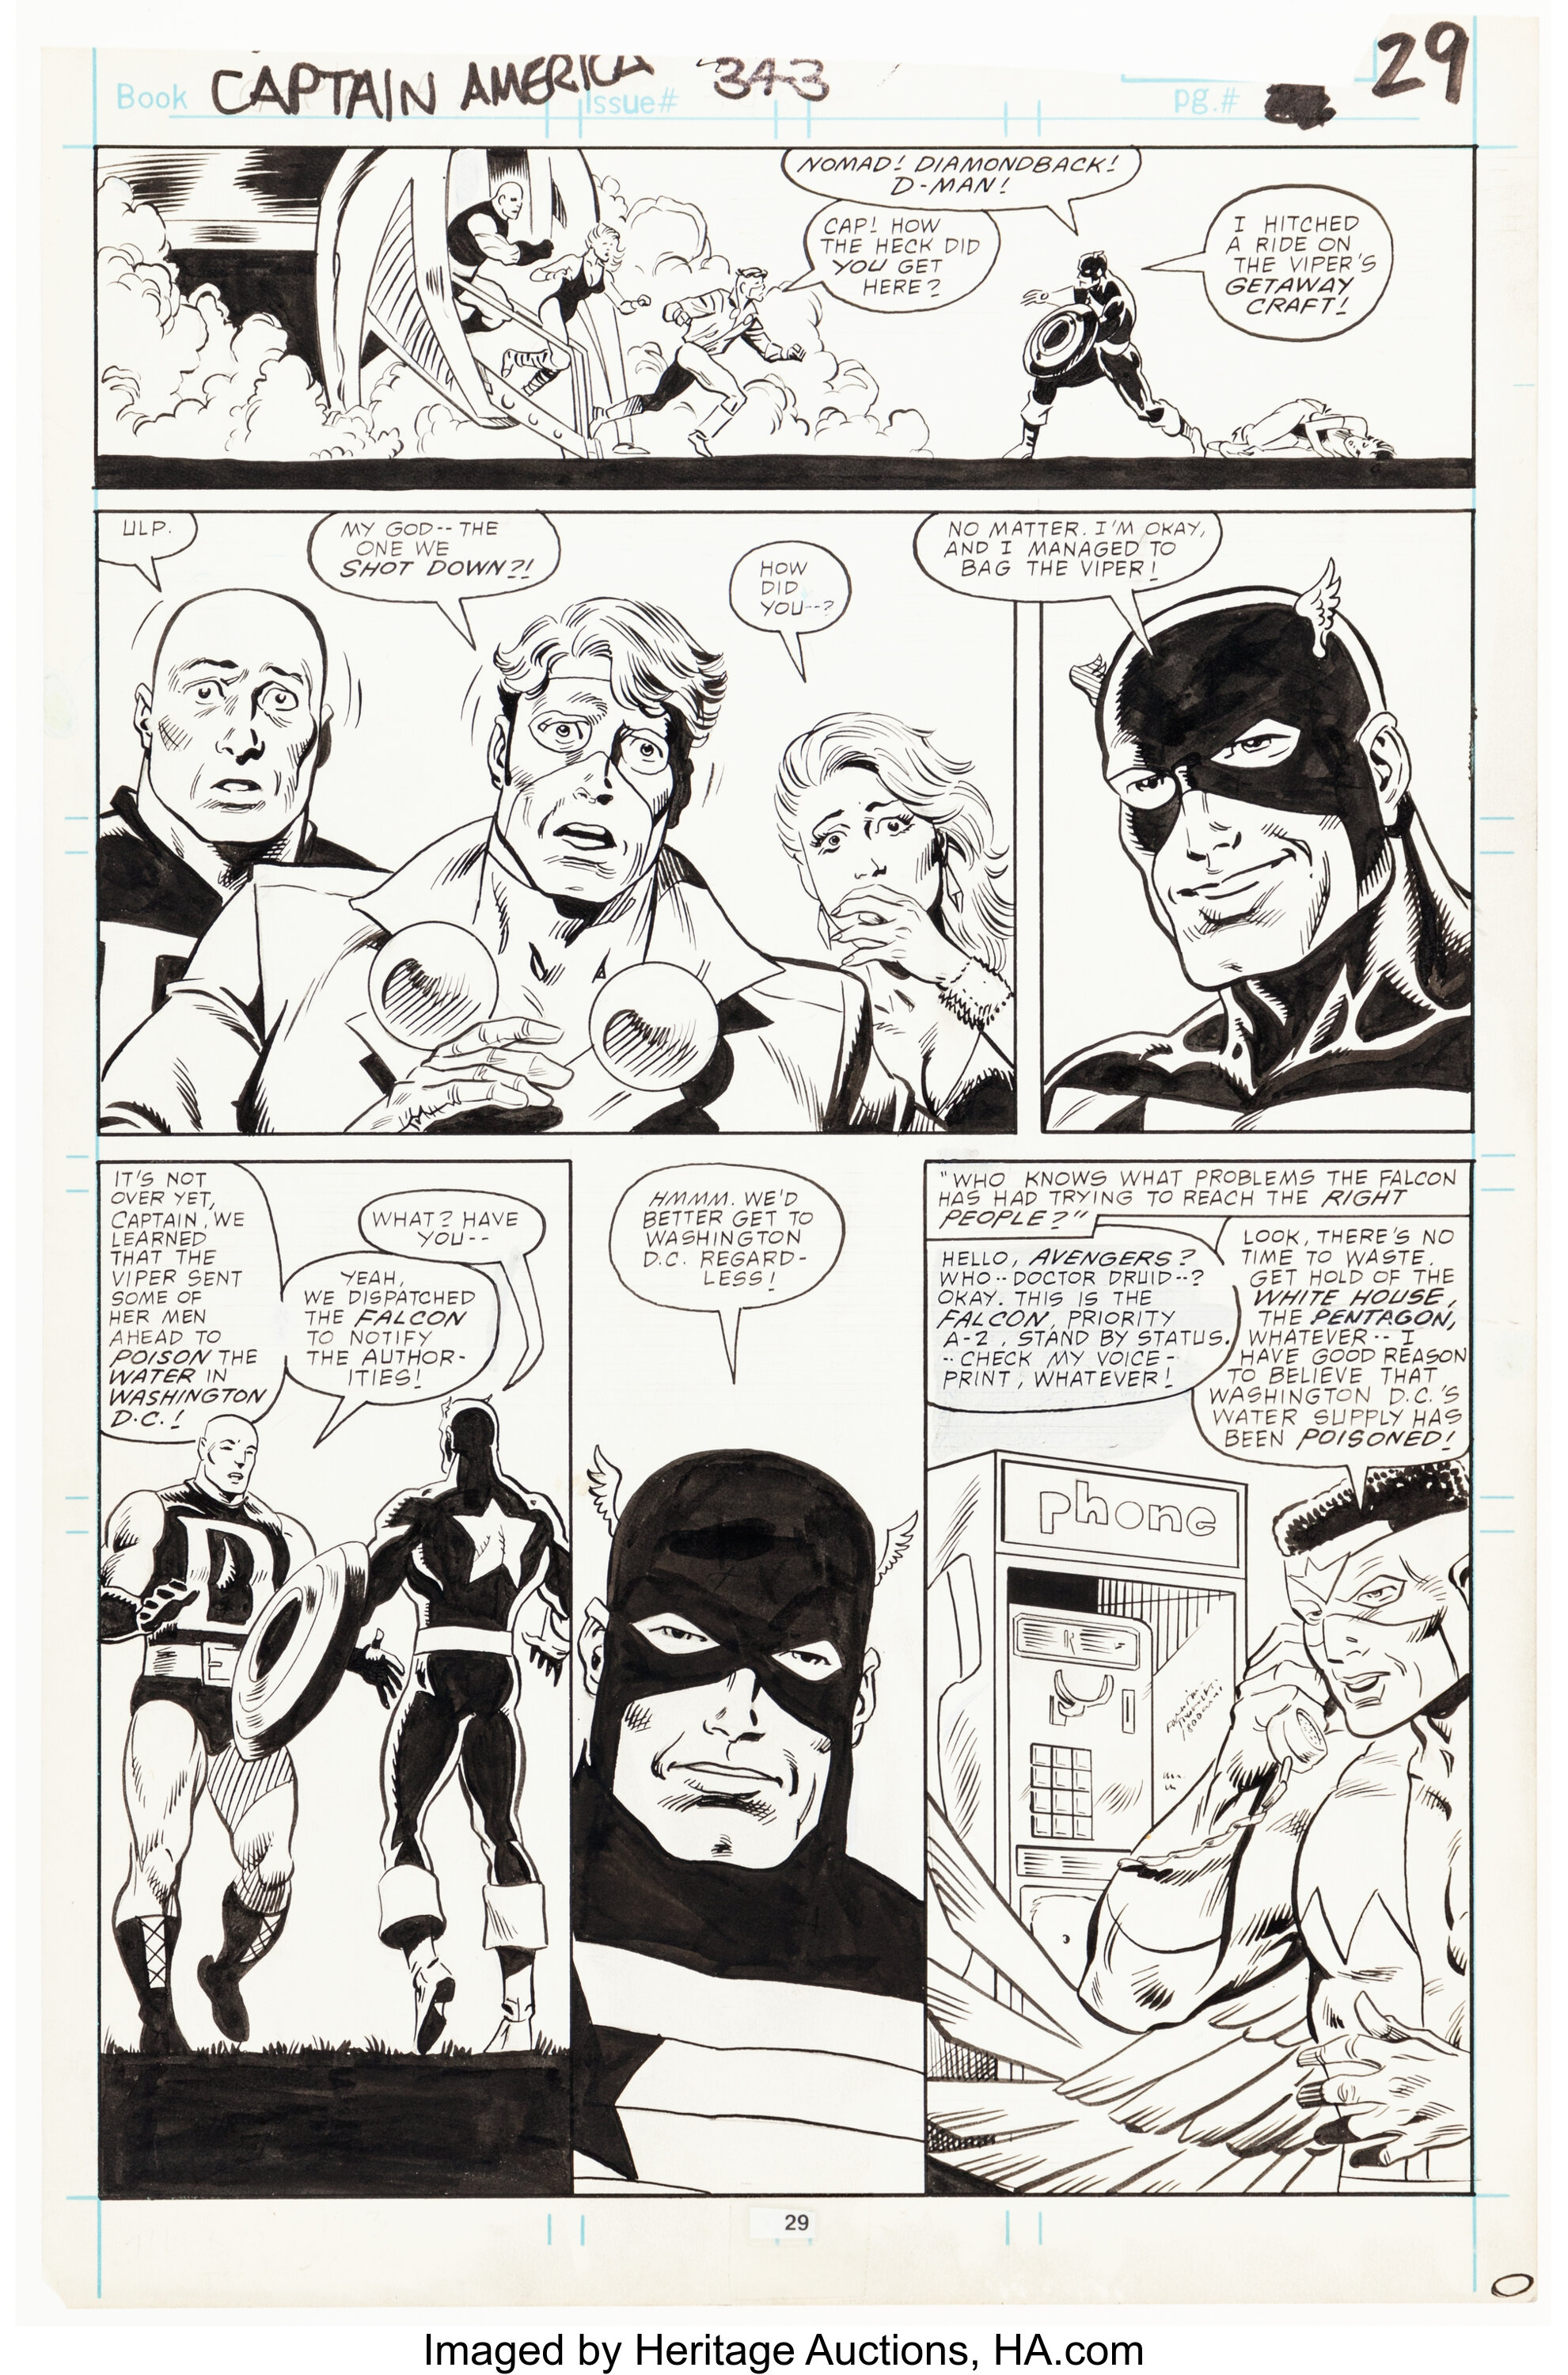 Kieron Dwyer And Al Milgrom Captain America 343 Story Page 21 Lot 47058 Heritage Auctions 5995